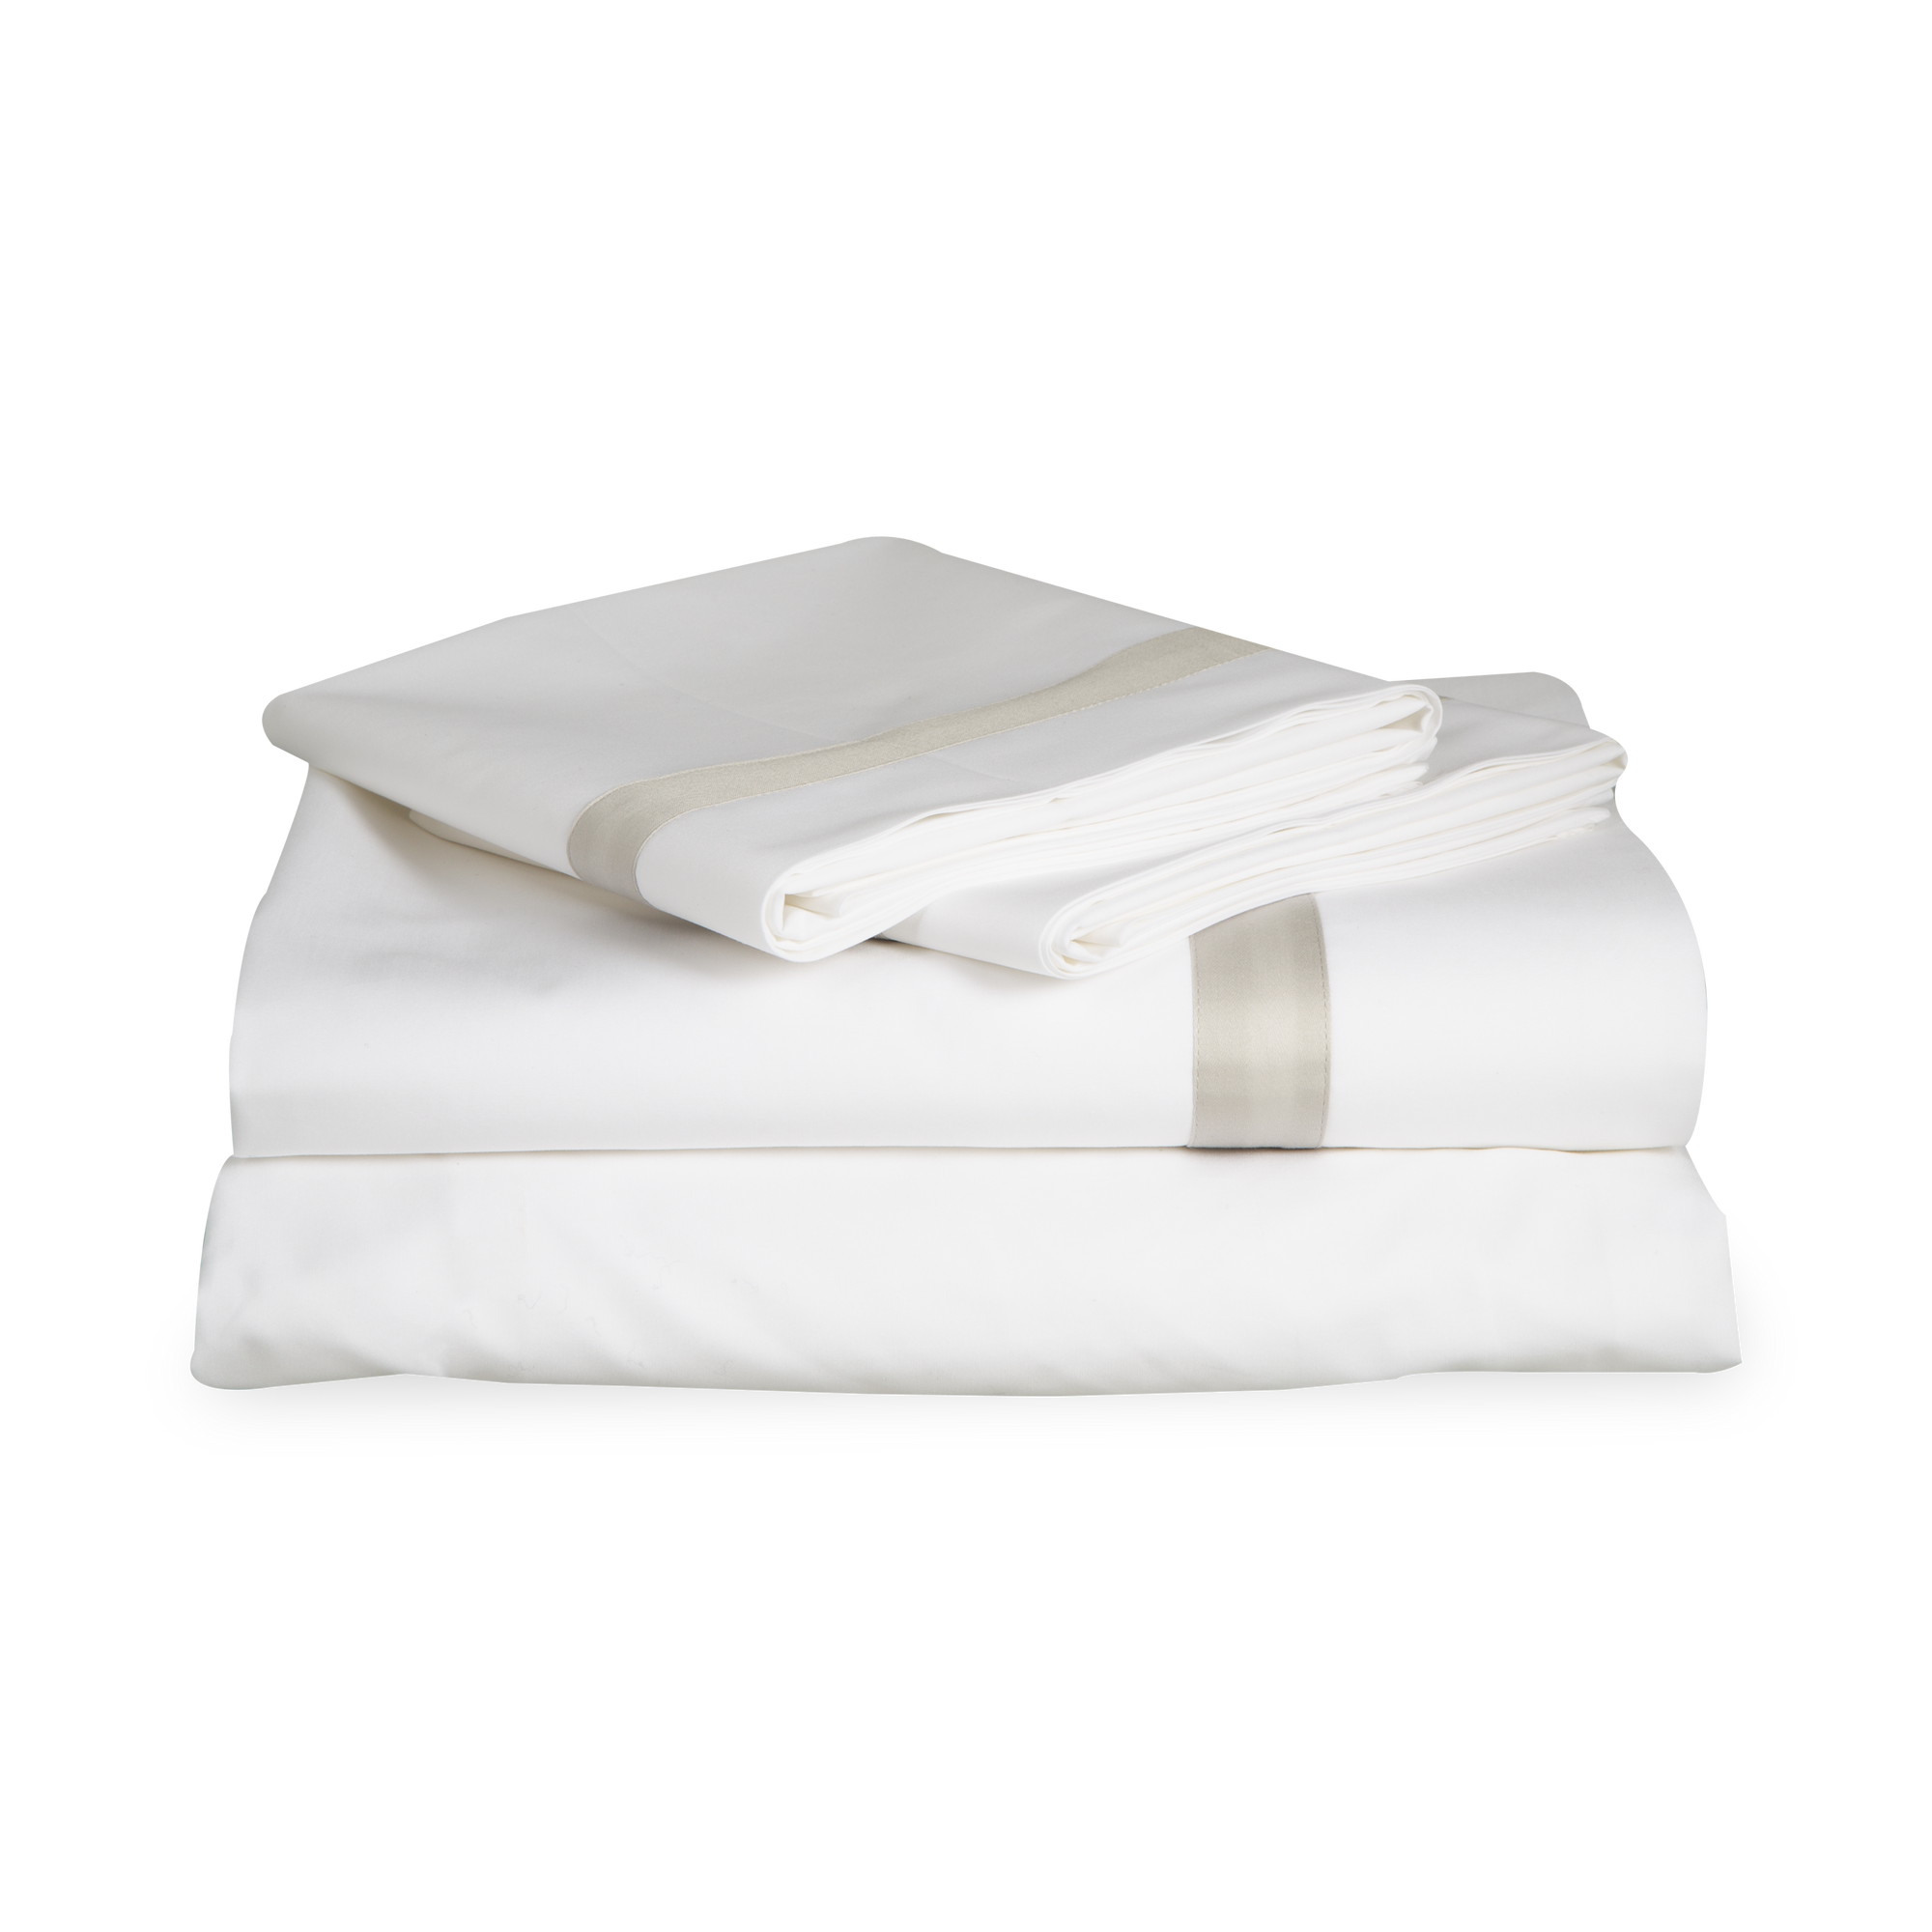 Produced in Italy exclusively for Elte, the Luna Collection features crisp and elegant white percale adorned with a 1